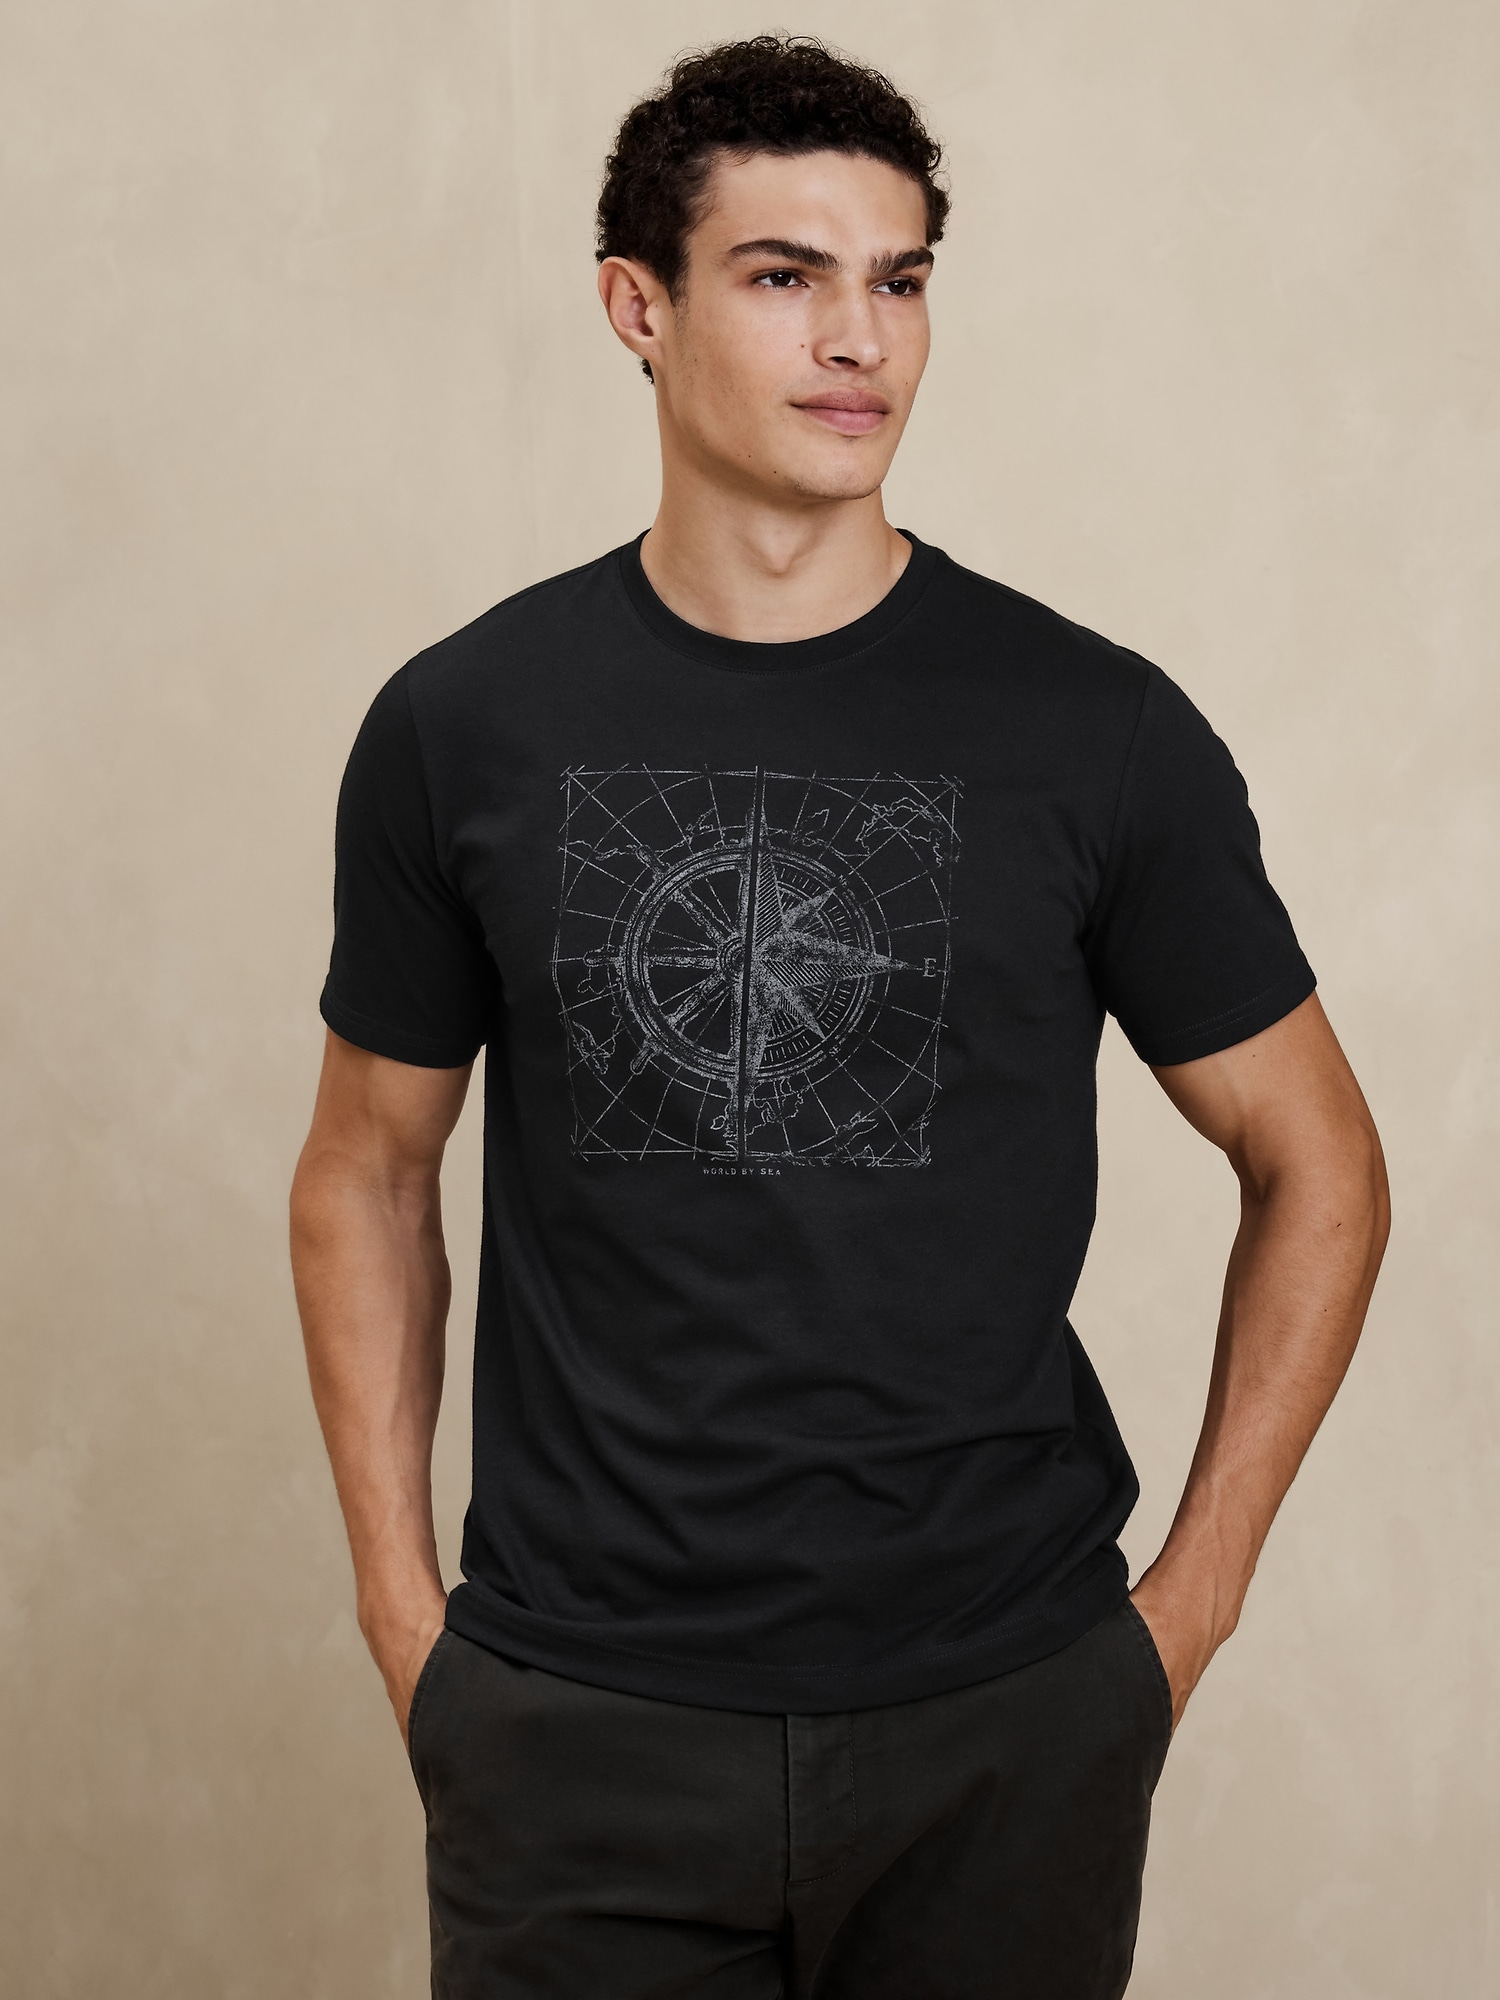 Compass Rose Graphic T-Shirt